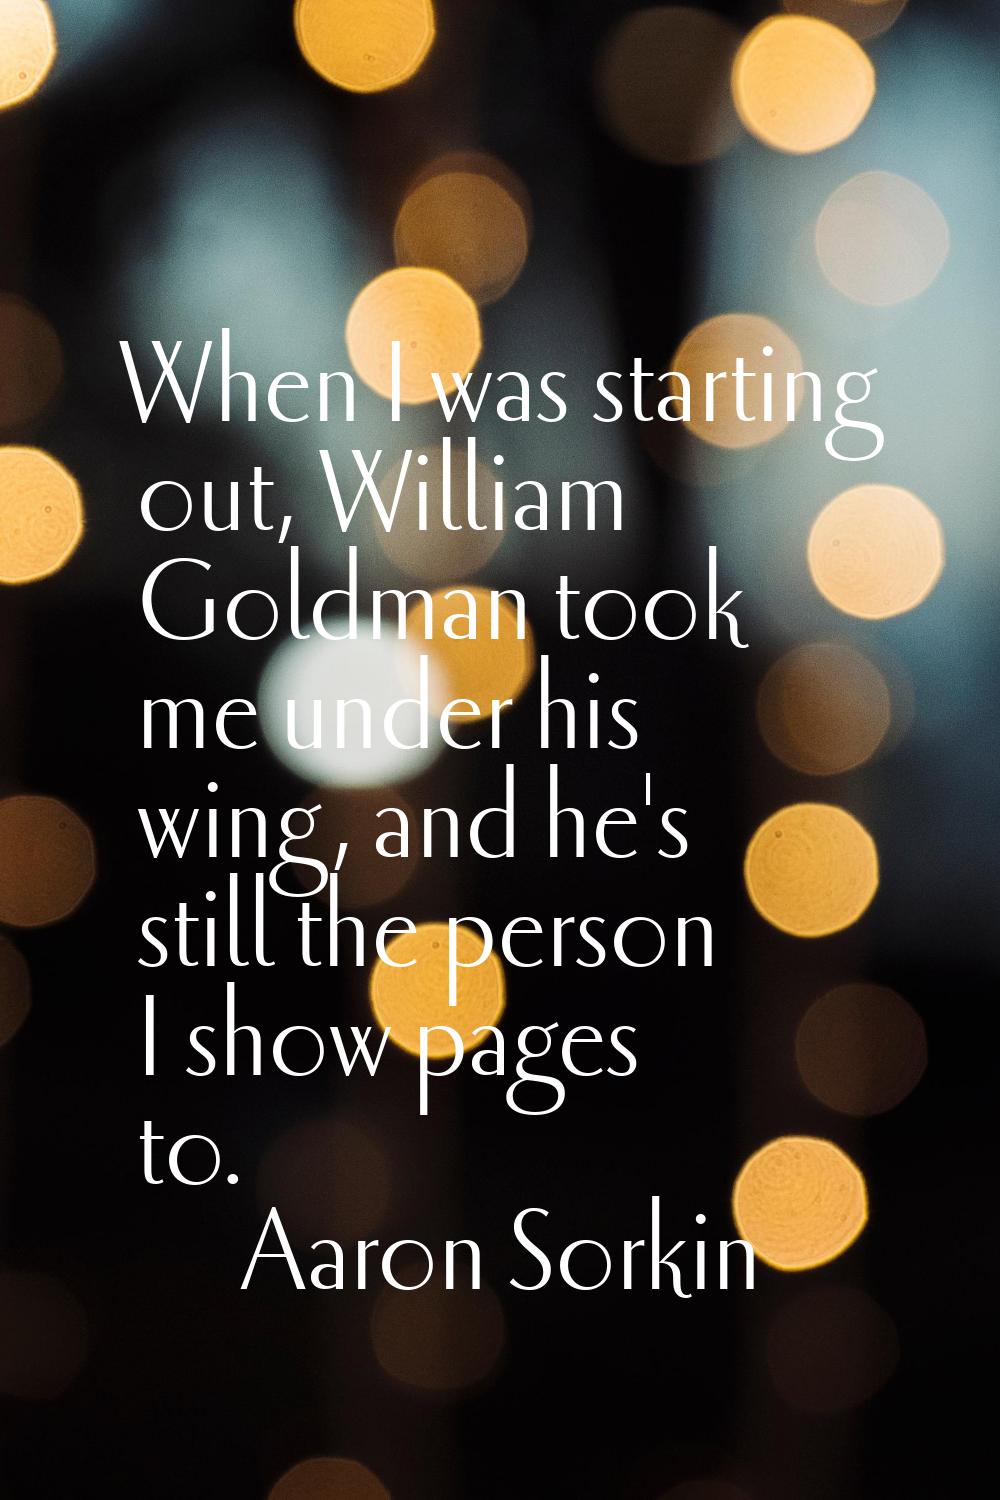 When I was starting out, William Goldman took me under his wing, and he's still the person I show p